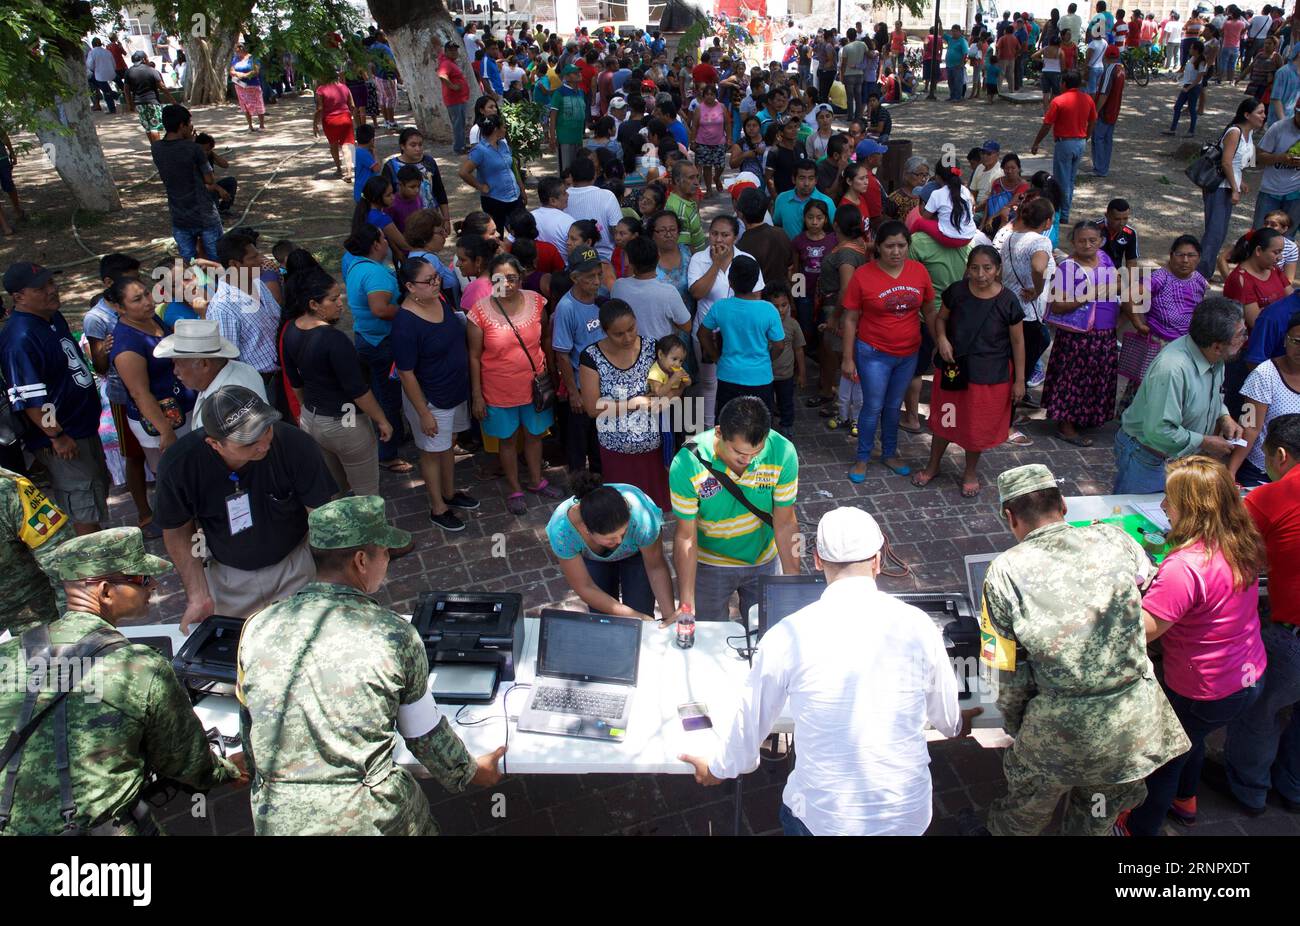 (170910) -- JUCHITAN (MEXICO), Sept. 10, 2017 -- Local residents register the loss of property to the authority after an earthquake hit in Juchitan, Oaxaca state, Mexico, Sept. 9, 2017. A powerful earthquake measuring 8.2 on the Richter scale struck off Mexico s southern coast late Thursday night, killing 90 people. ) MEXICO-OAXACA-JUCHITAN-EARTHQUAKE DanxHang PUBLICATIONxNOTxINxCHN Stock Photo